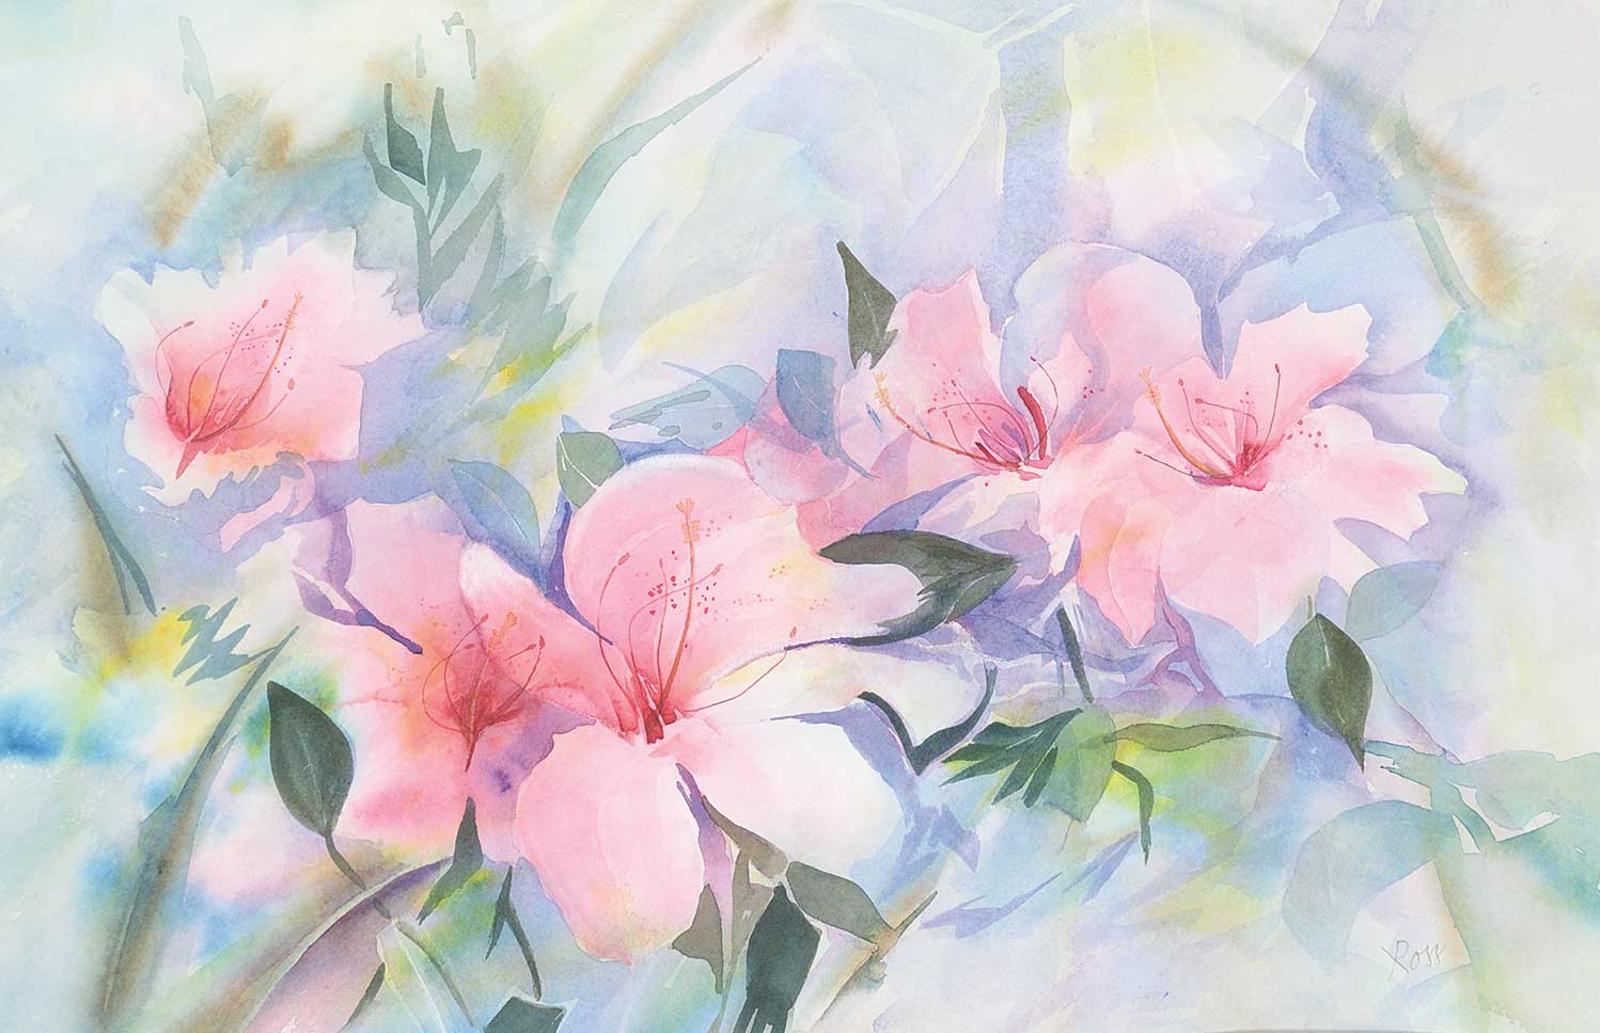 Yvonne Ross - Untitled - Delicate Pink Flowers